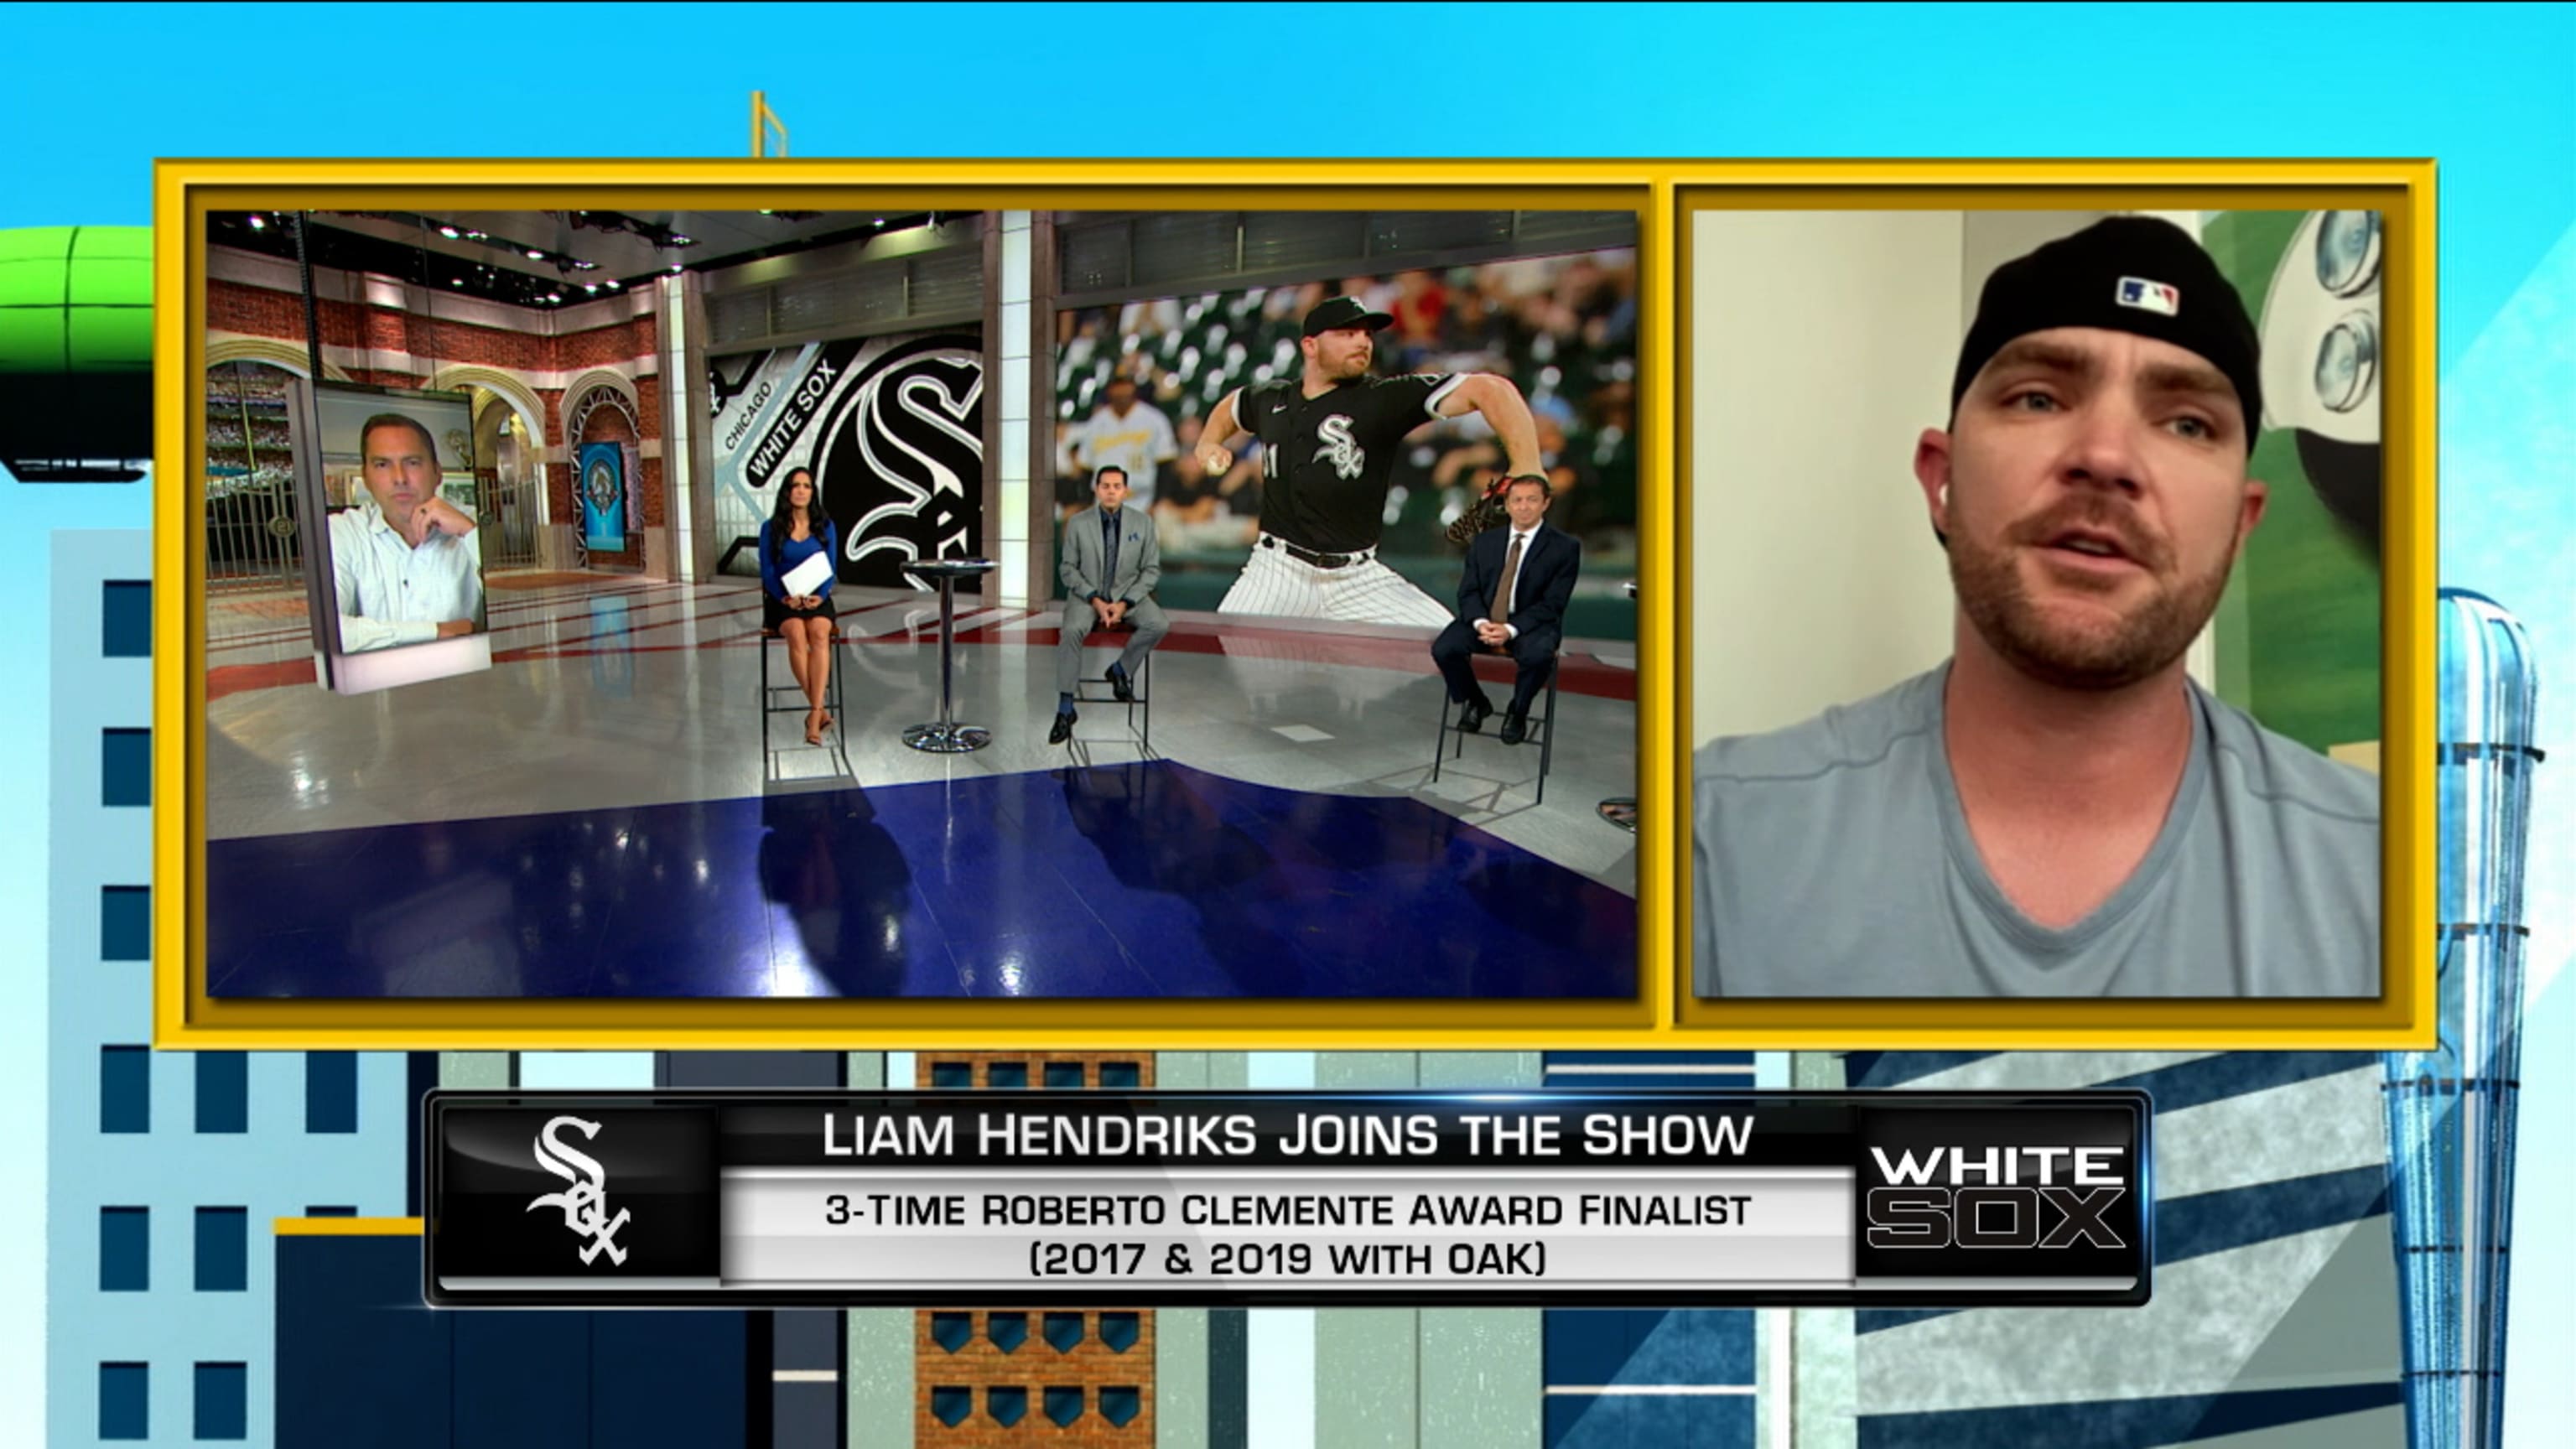 All-Star pitcher Liam Hendriks shares how he closed out cancer at